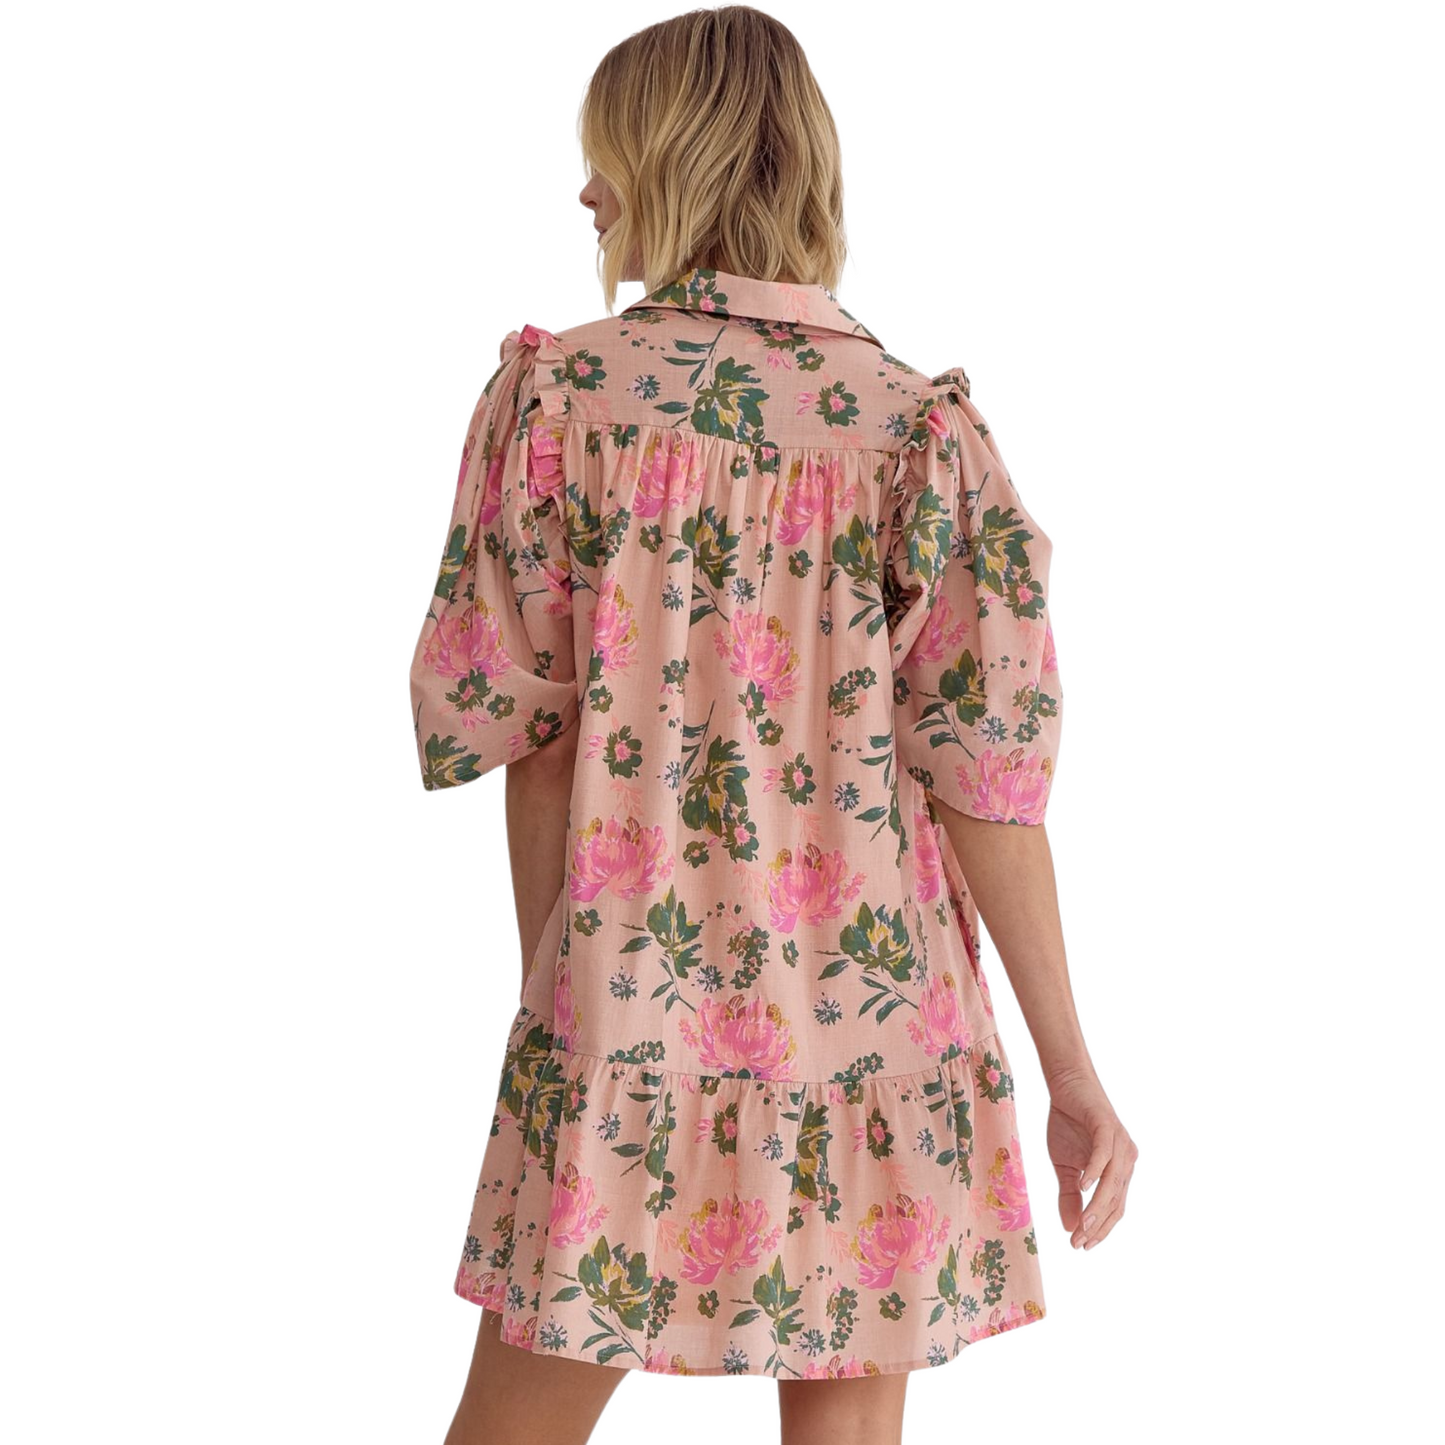 Introducing our Floral Button Up Mini Dress. This peach-colored woven dress features a floral pattern and a collared neckline. The half sleeves have ruffled trimming for an added touch. Stay comfortable with pockets at the side and a lightweight, lined design. Perfect for any occasion.